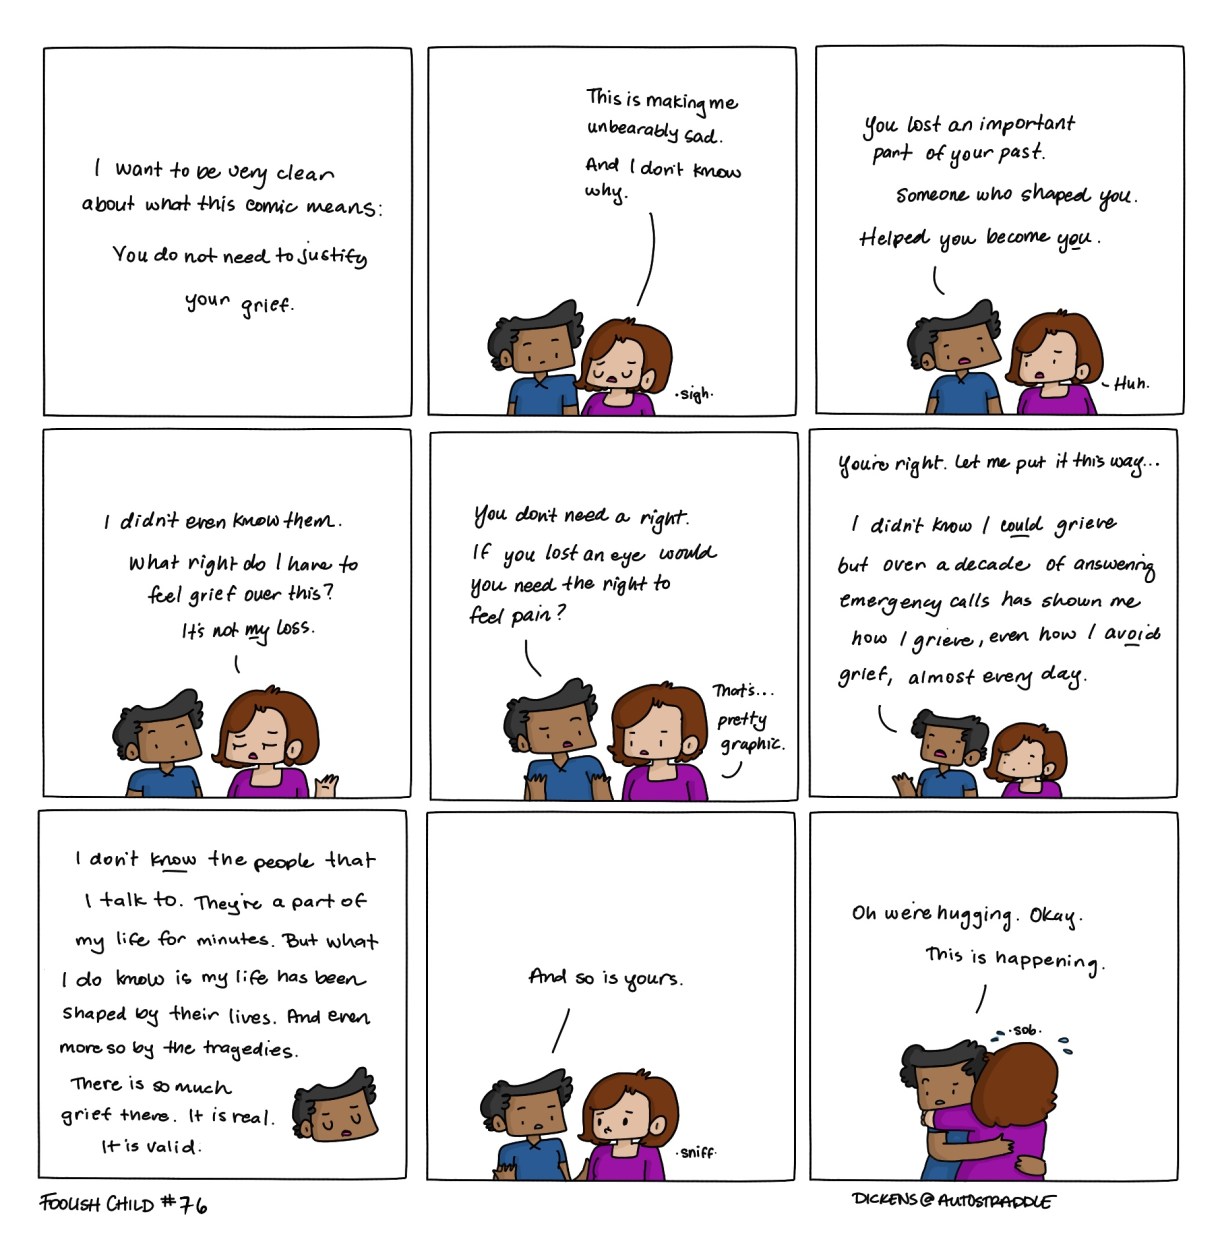 I want to be very clear about what this comic means: You do not need to justify your grief. Person 1: "This is making me unbearably sad... and I don't know why." Person 2: "You lost an important part of your past. Someone who shaped you. Helped you become you." Person 1: "I didn't even know them... what right do I have to feel grief over this? It's not my loss." Person 2: "You don't need a right. If you lost an eye, would you need the right to feel pain?" Person 1: "That's... pretty graphic." Person 2: "You're right. Let me put it this way... I didn't know I COULD grieve, but over a decade of answering emergency calls has shown me how I grieve, even how I AVOID grief, almost every day." Person 2: "I don't KNOW the people that I talk to. They're a part of my life for minutes. But what I do know is my life has been shaped by their lives. And even more so by the tragedies. There is so much grief there. It is real. It is valid." Person 2: "And so is yours." [Person 1 hugs Person 2] Person 2: "Oh we're hugging. Okay. This is happening."